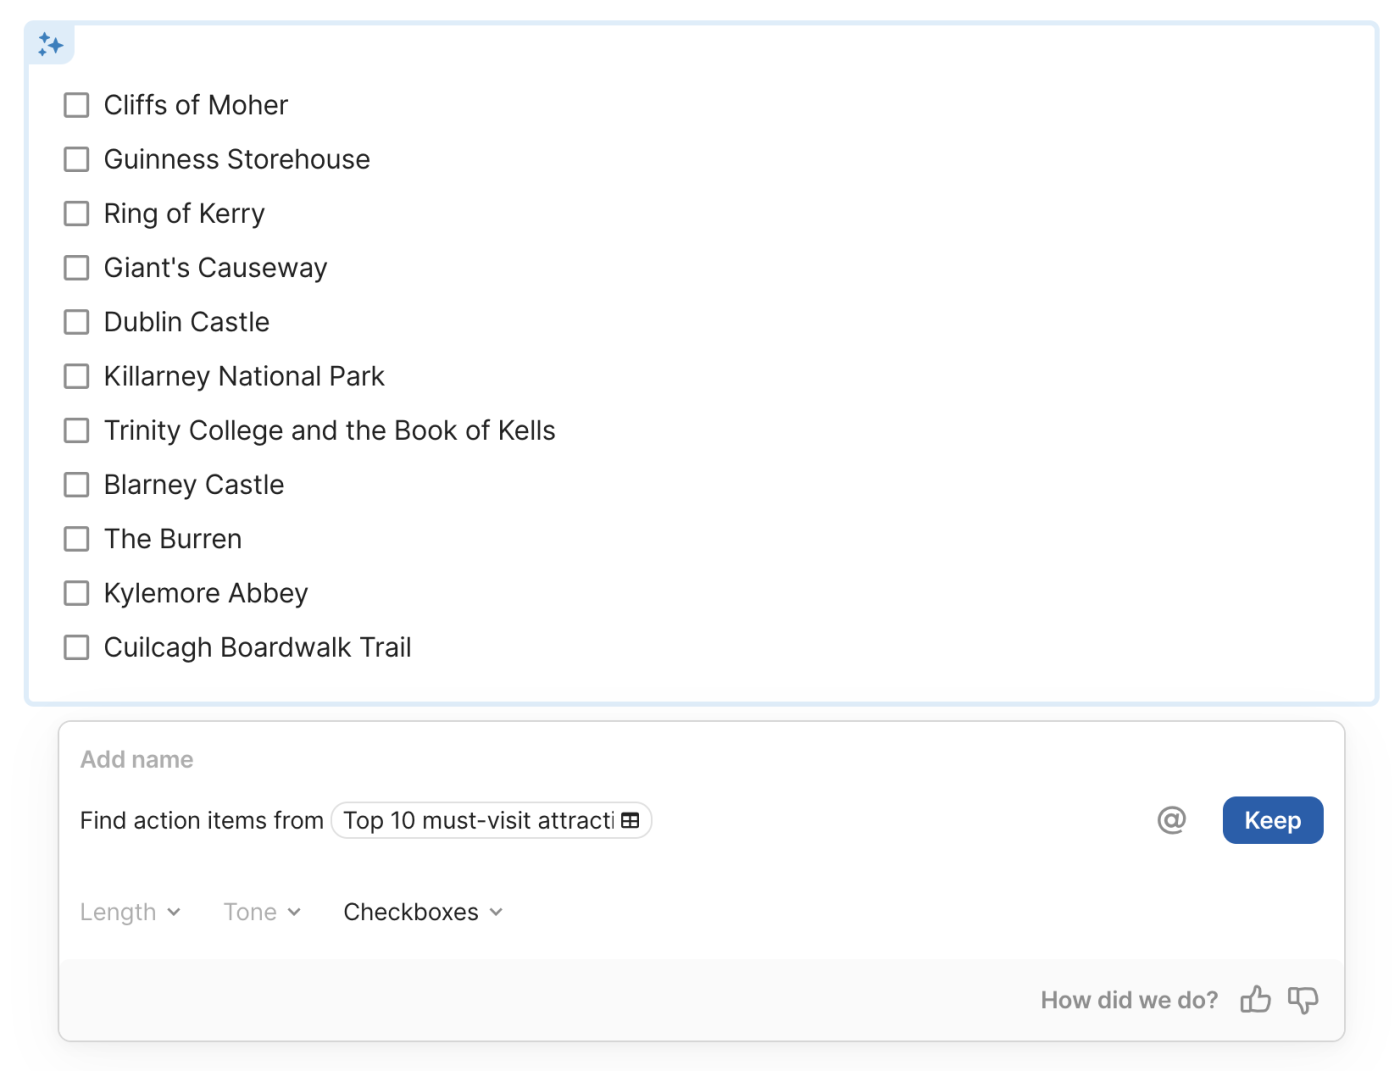 AI-generated checklist in an AI block based on the prompt "Find action items from Top 10 Must-Visit Places in Ireland."